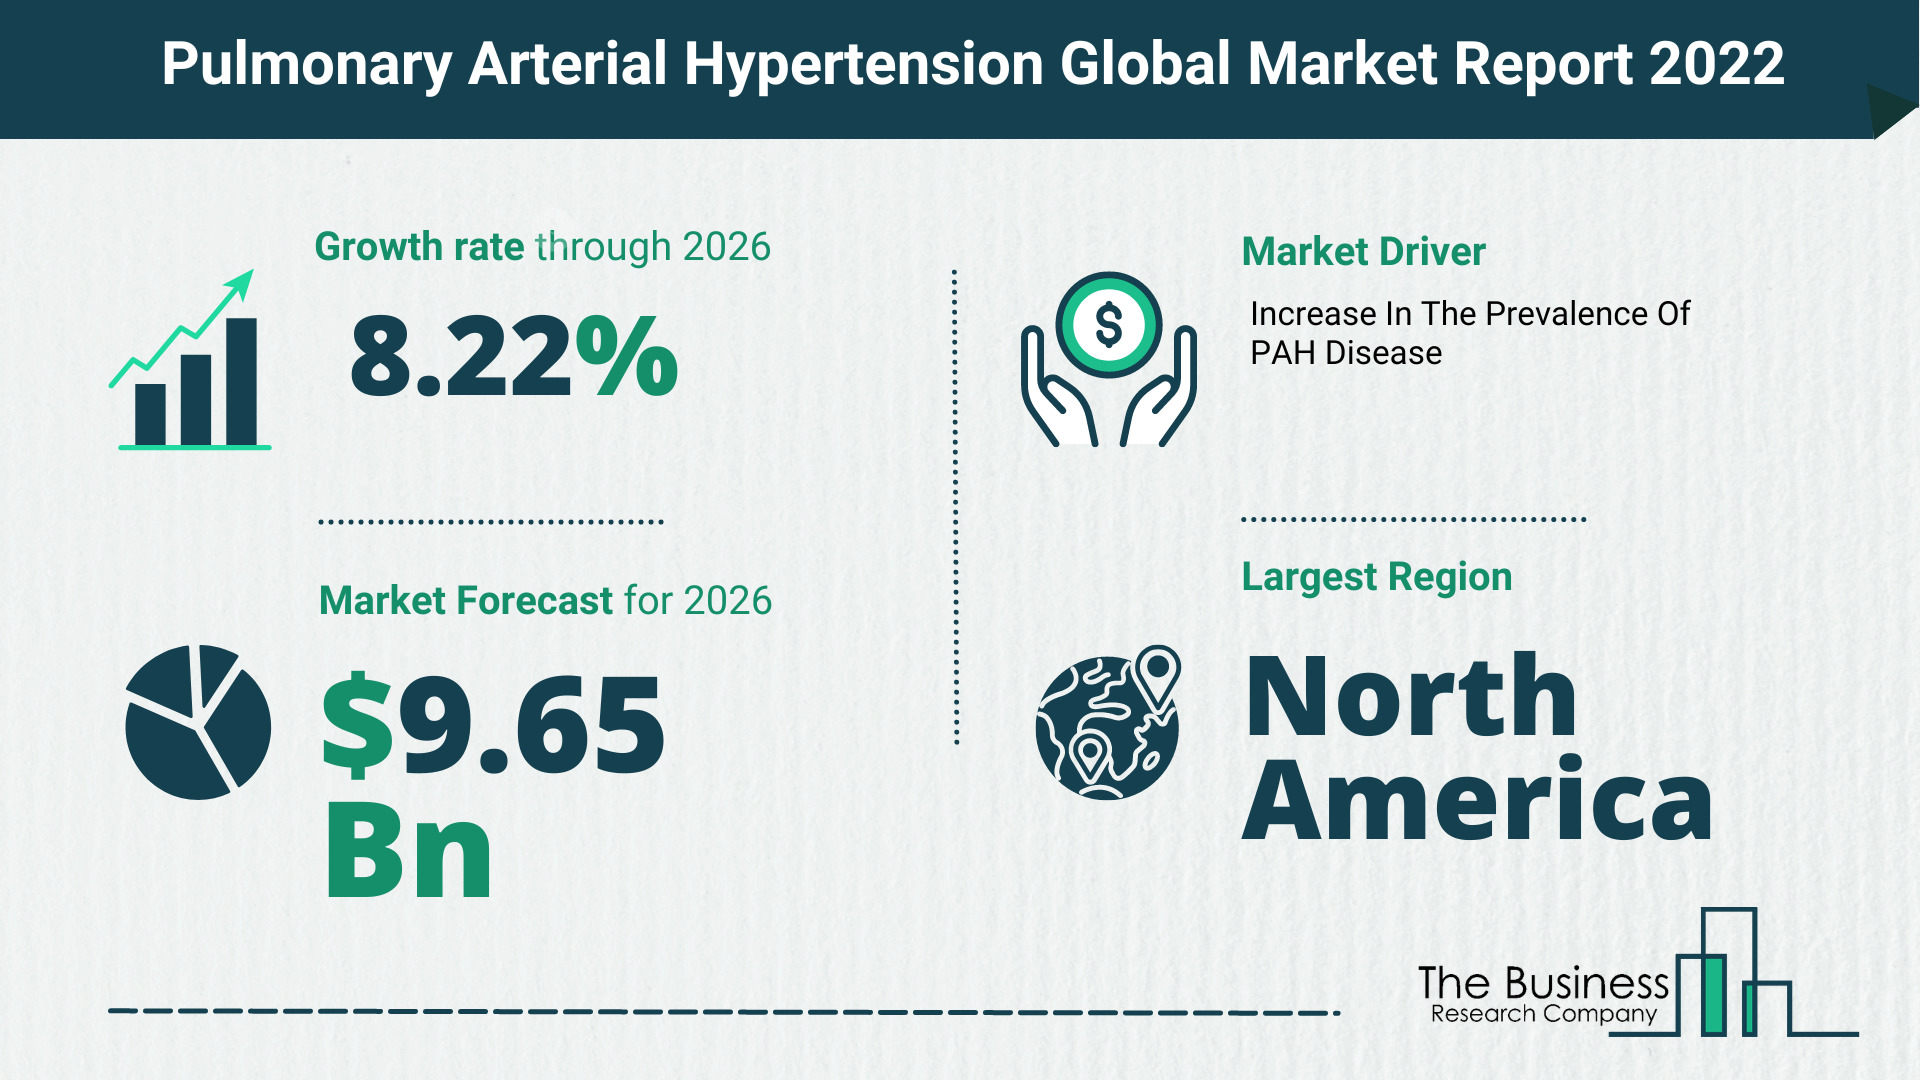 Latest Pulmonary Arterial Hypertension Market Growth Study 2022-2026 By The Business Research Company